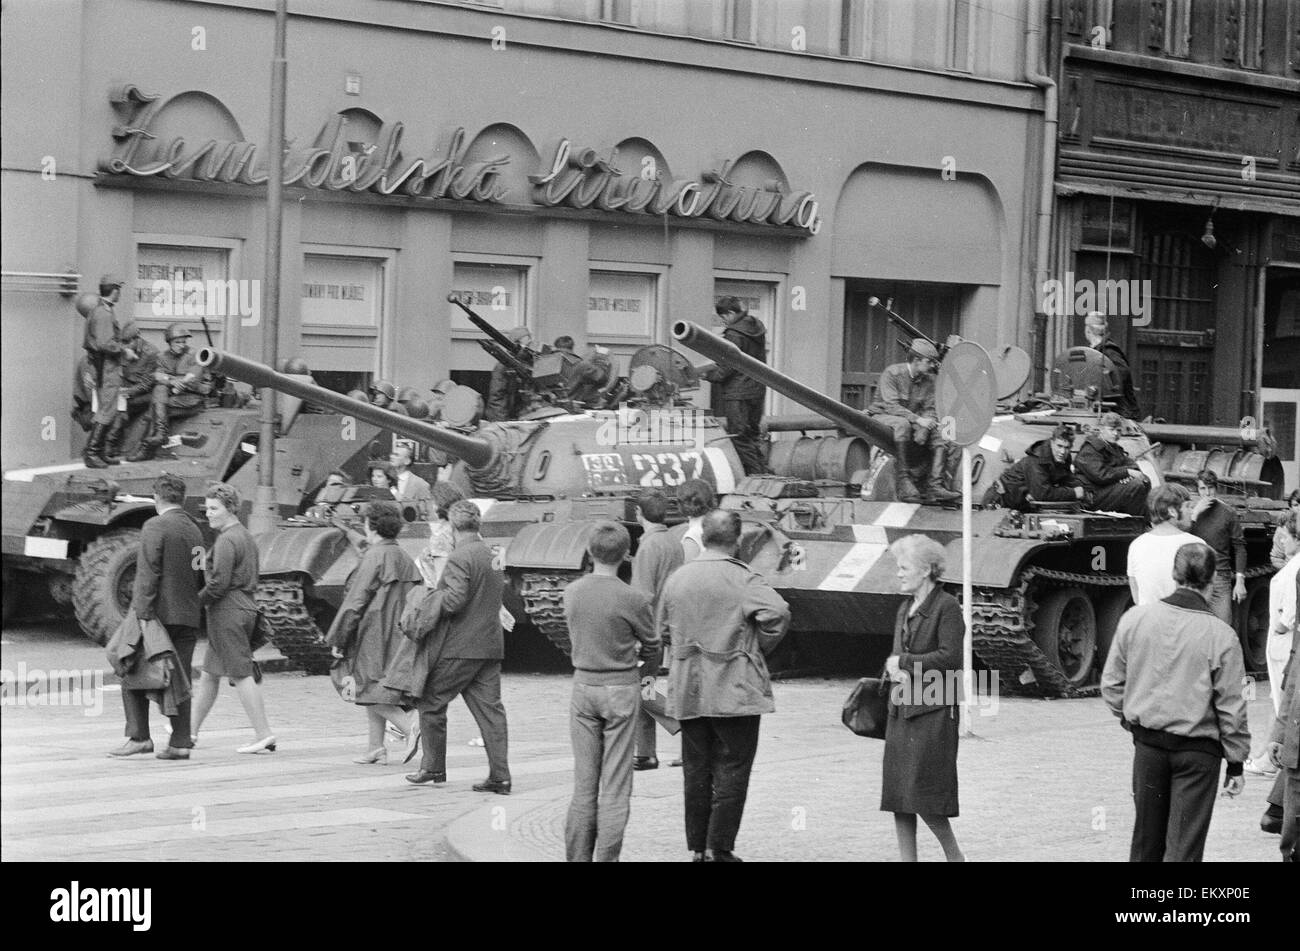 Prague, Czechoslovakia. End of the Prague Spring, a period of political liberalization in Czechoslovakia during the era of its domination by the Soviet Union after World War II. A Russian tank patrols in Wenselas Square as locals walk by. August 1968. Stock Photo